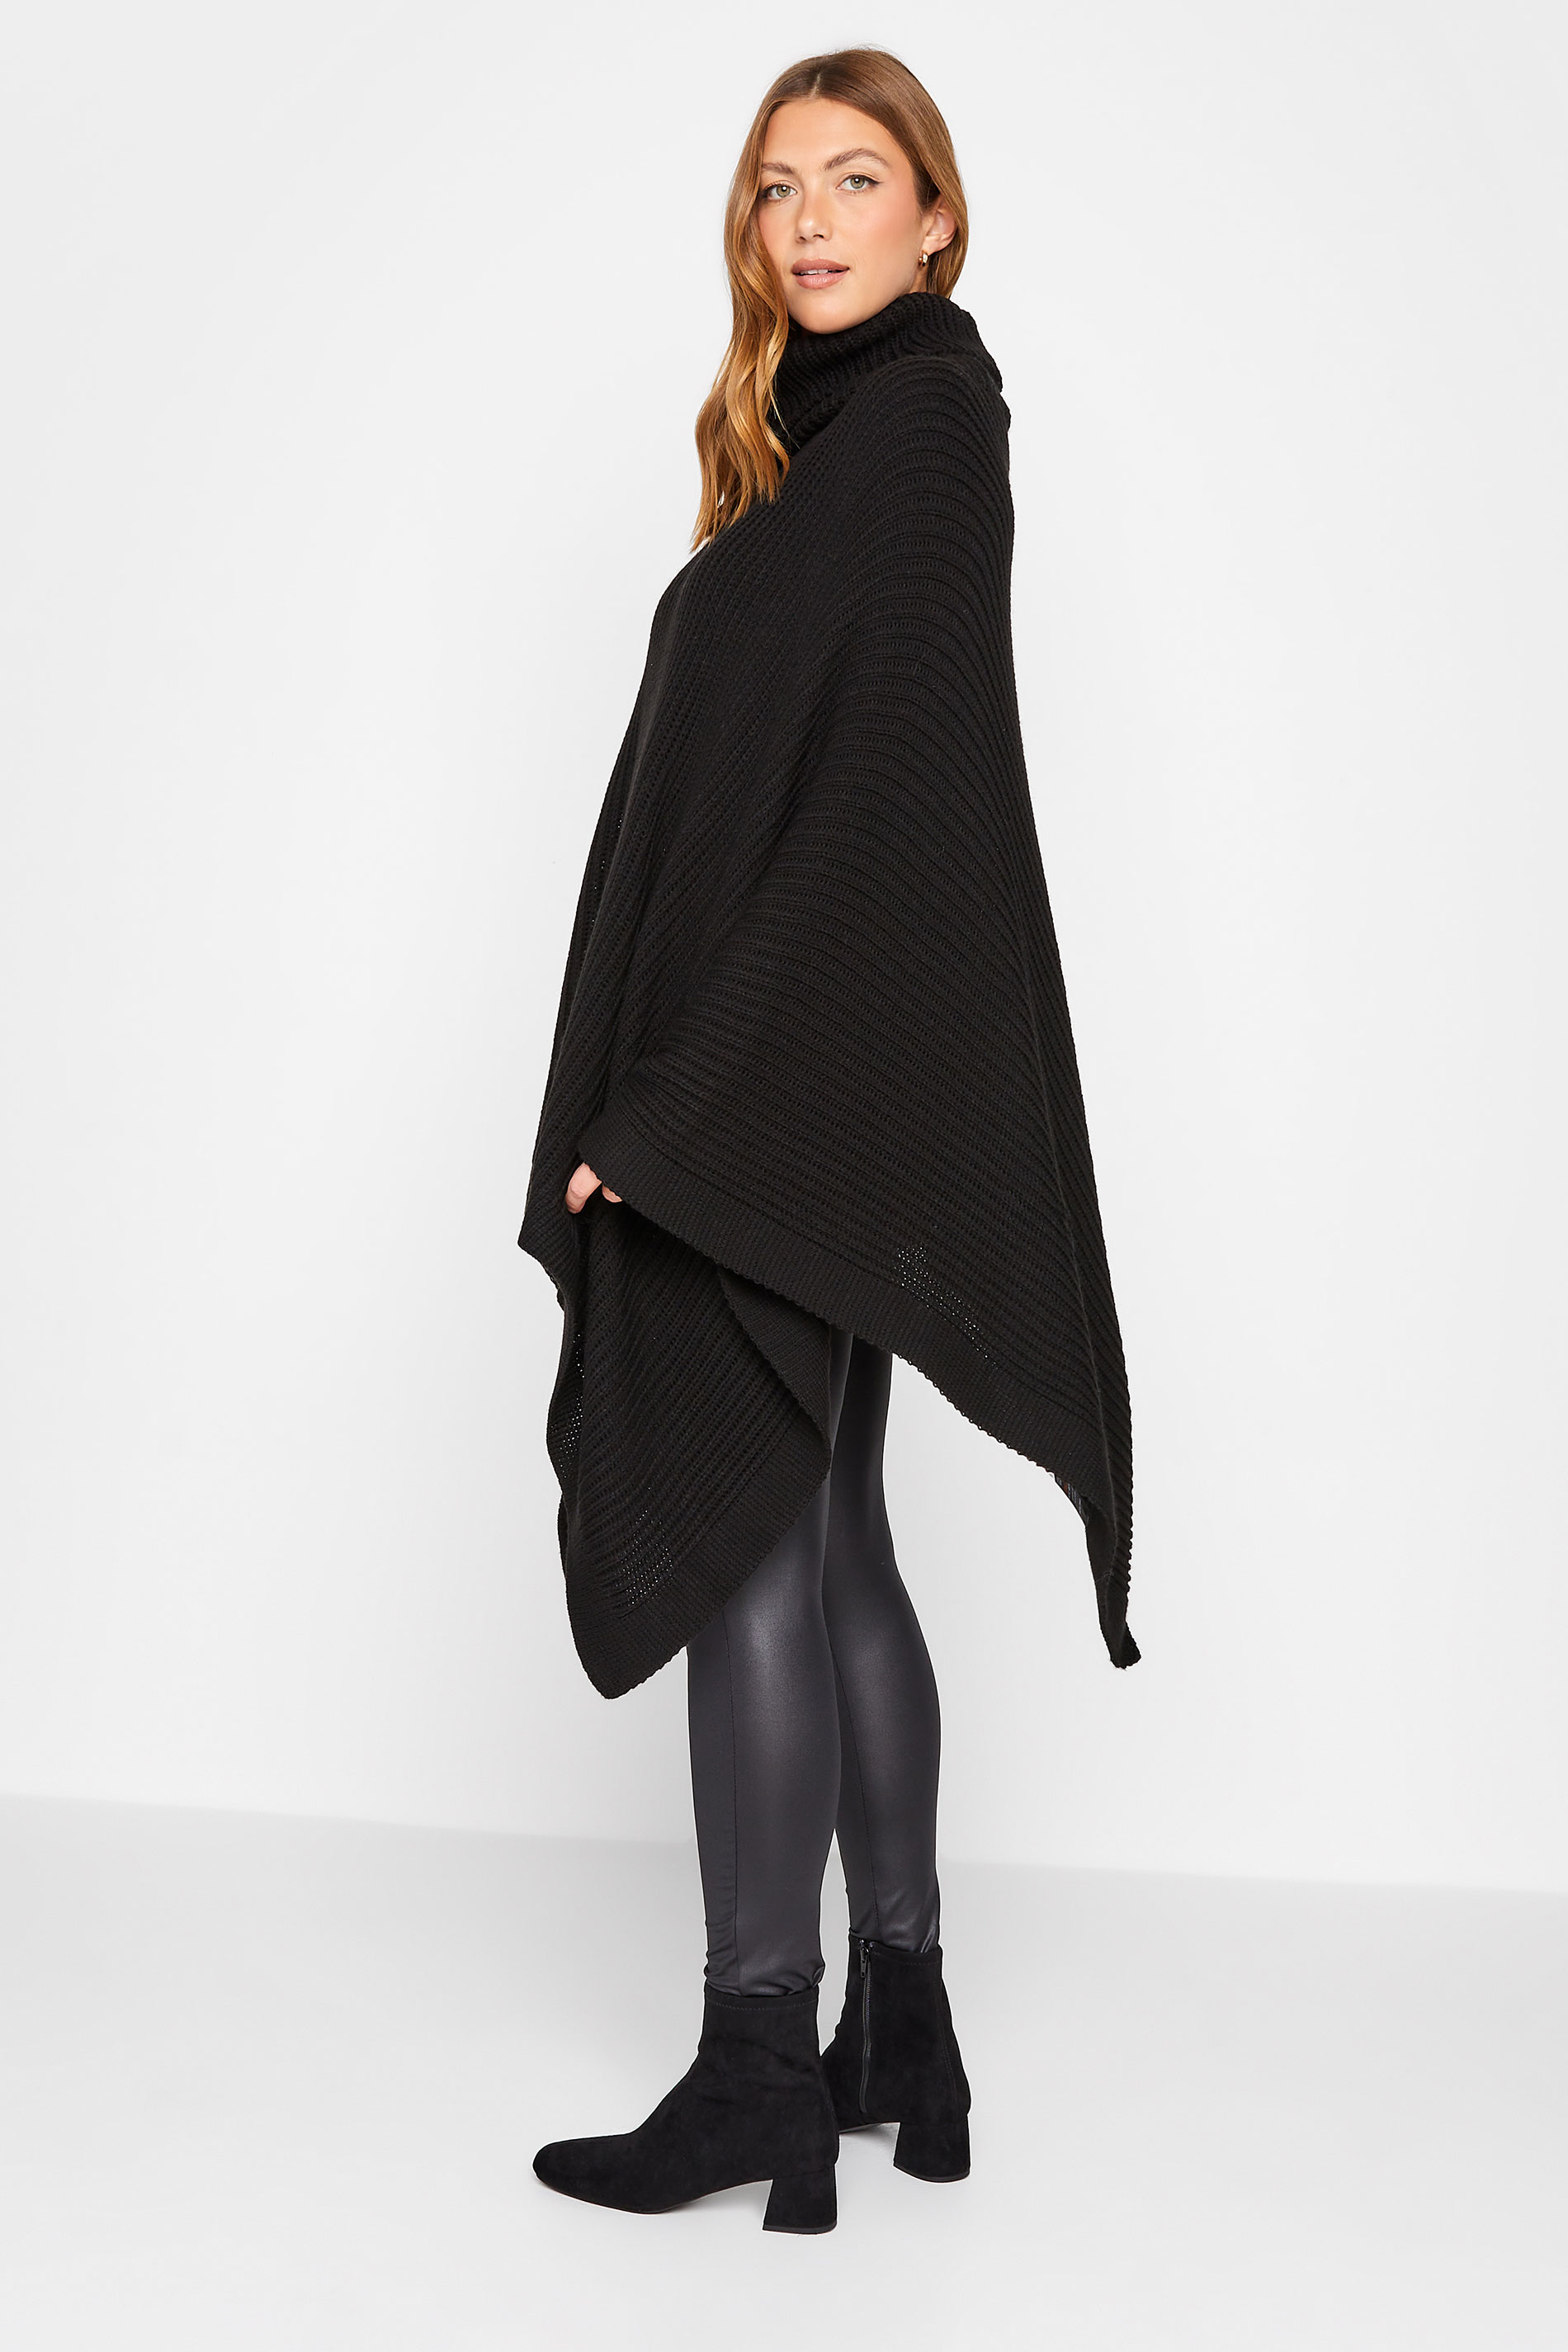 LTS Tall Women's Black Roll Neck Knitted Poncho | Long Tall Sally 1